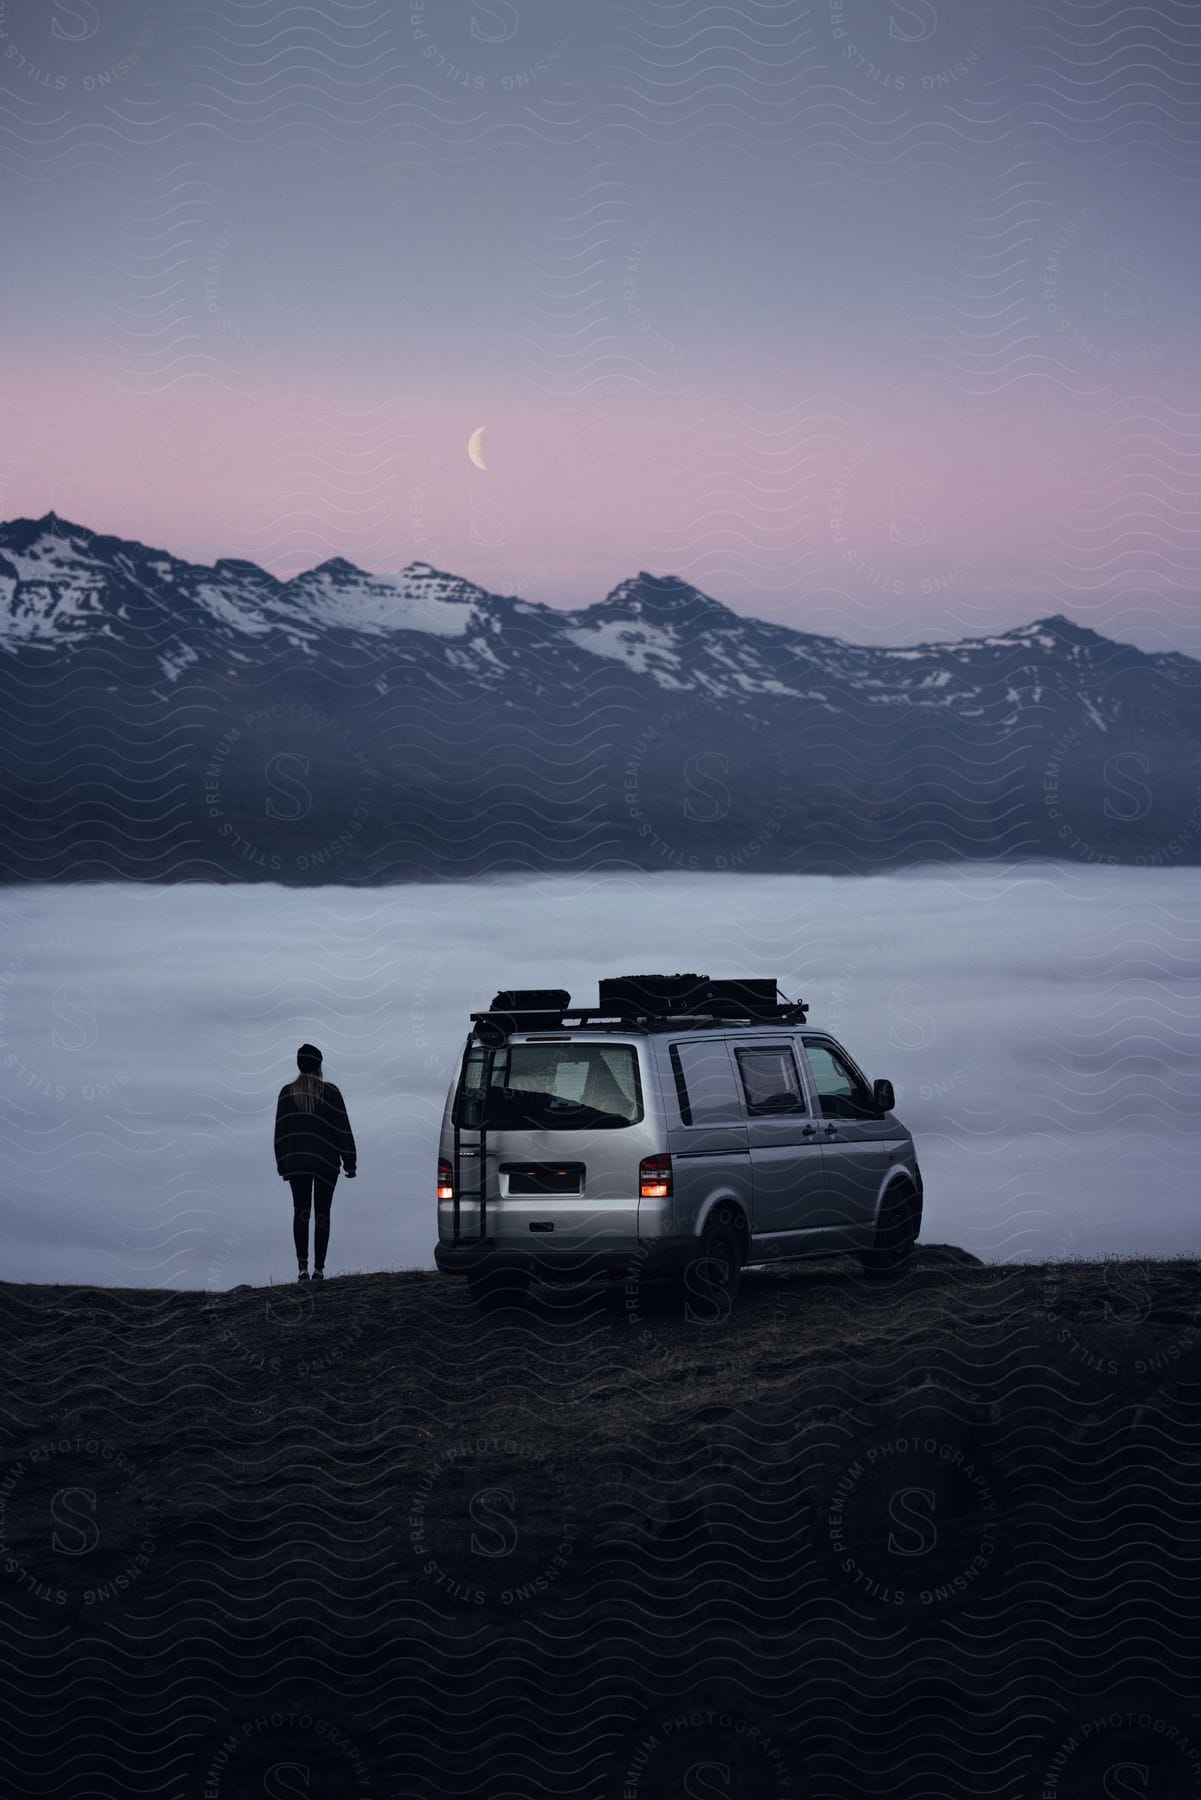 A woman in winter clothing stands next to a van on a hill overlooking a moonlit mountain range and a foggy valley